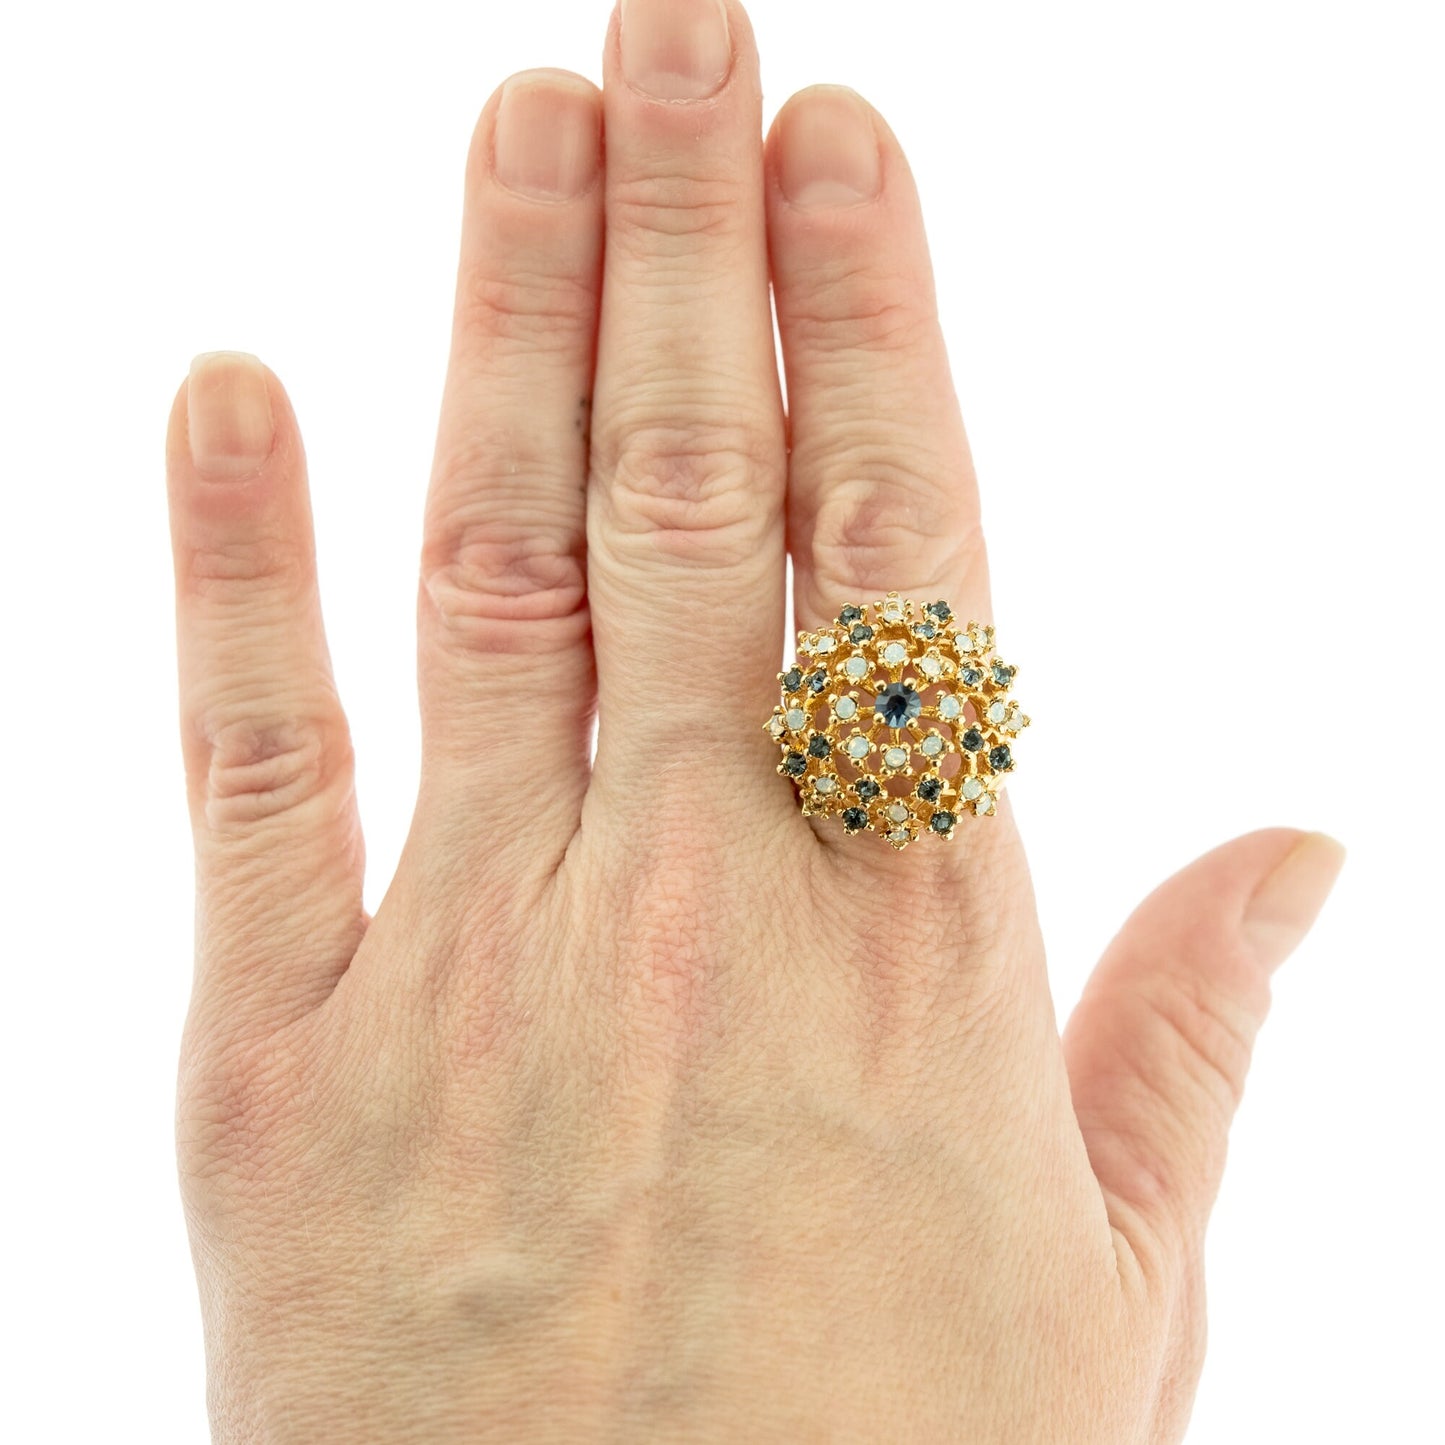 Vintage Ring Sapphire Swarovski Crystal and Pinfire Opal Burst Ring 18k Gold R195 Antique Womans Jewelry - Limited Stock - Never Worn